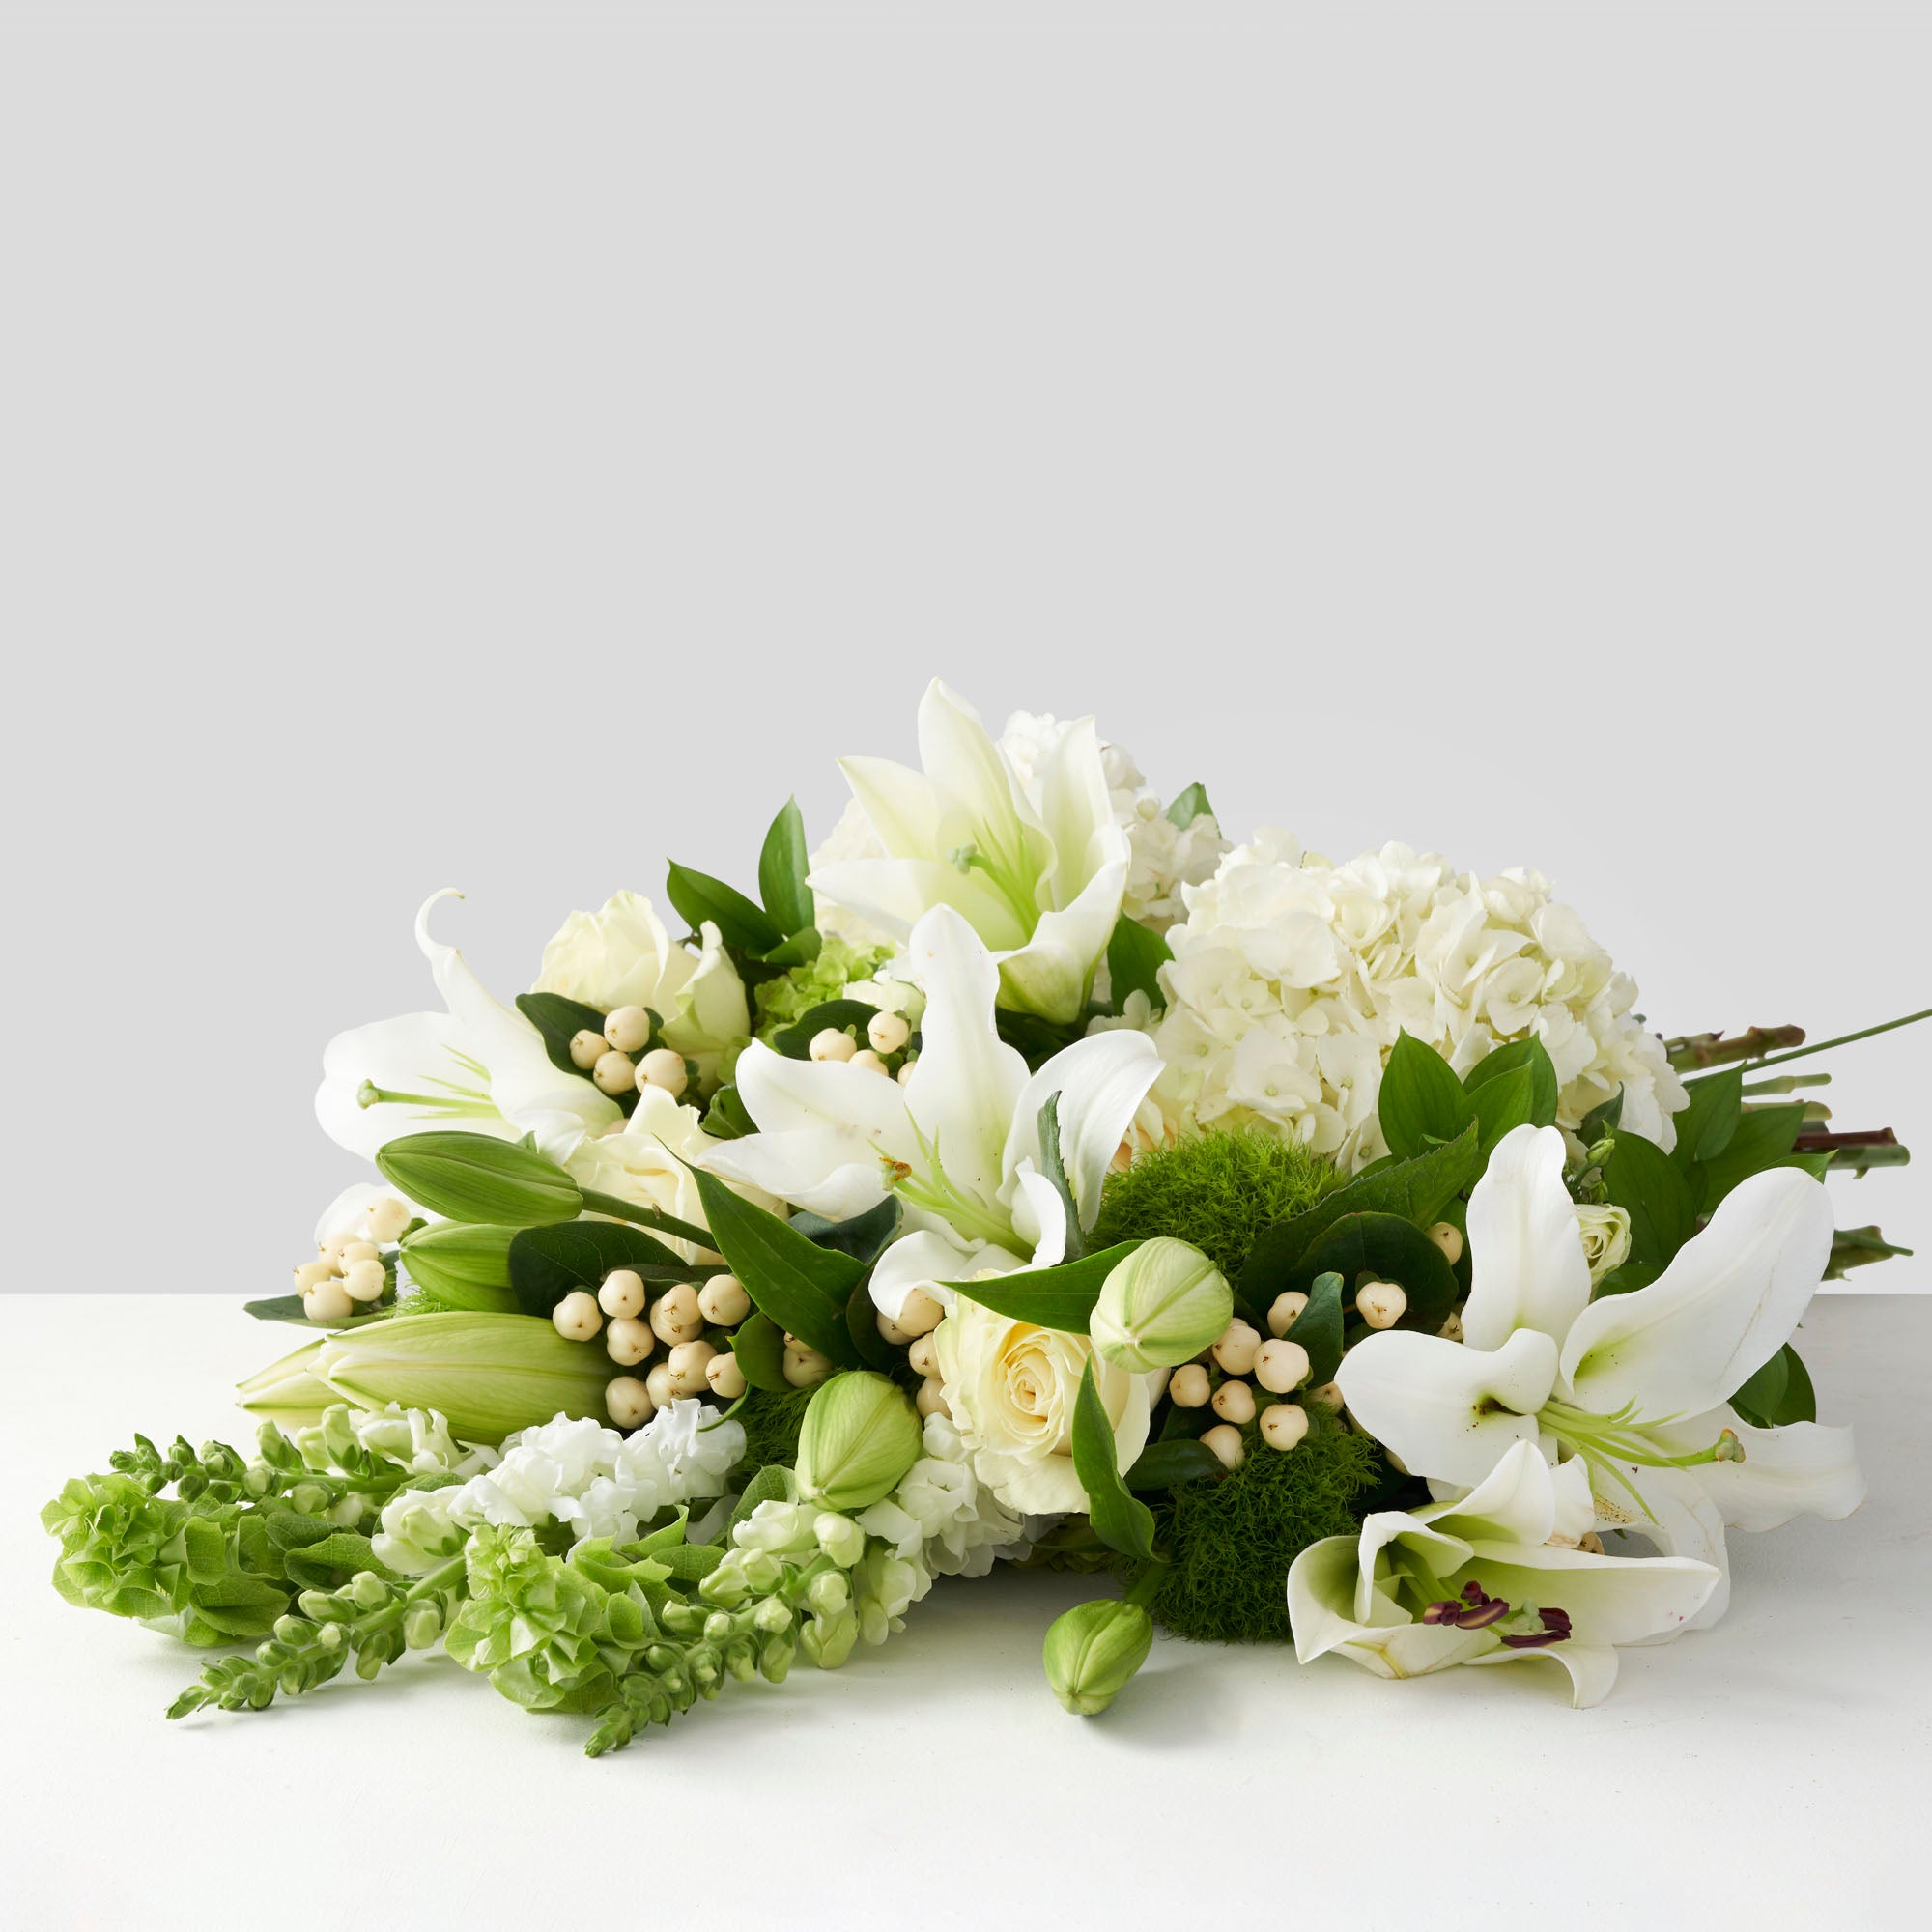 Large bouquet of white and green flowers on white background.